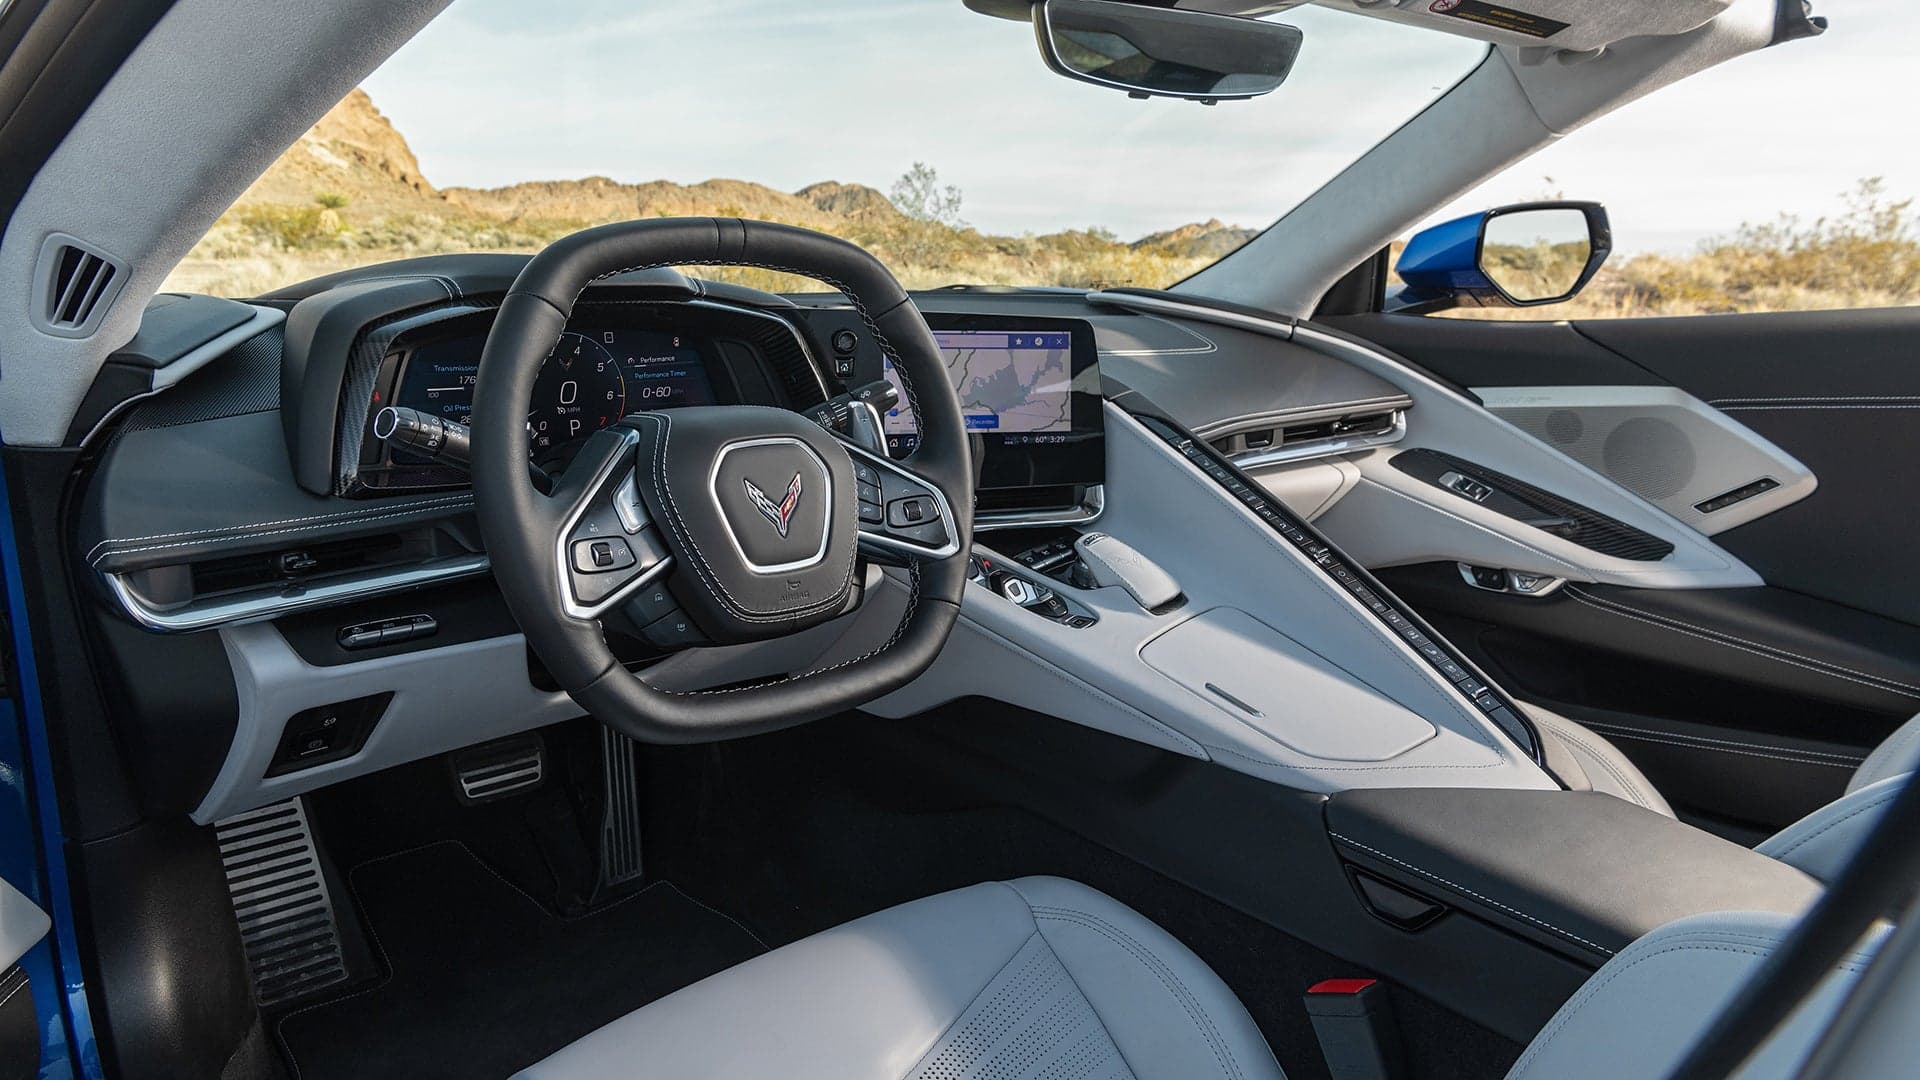 GM Wants to Get Rid of the C8 Corvette’s Funky Center Console: Report